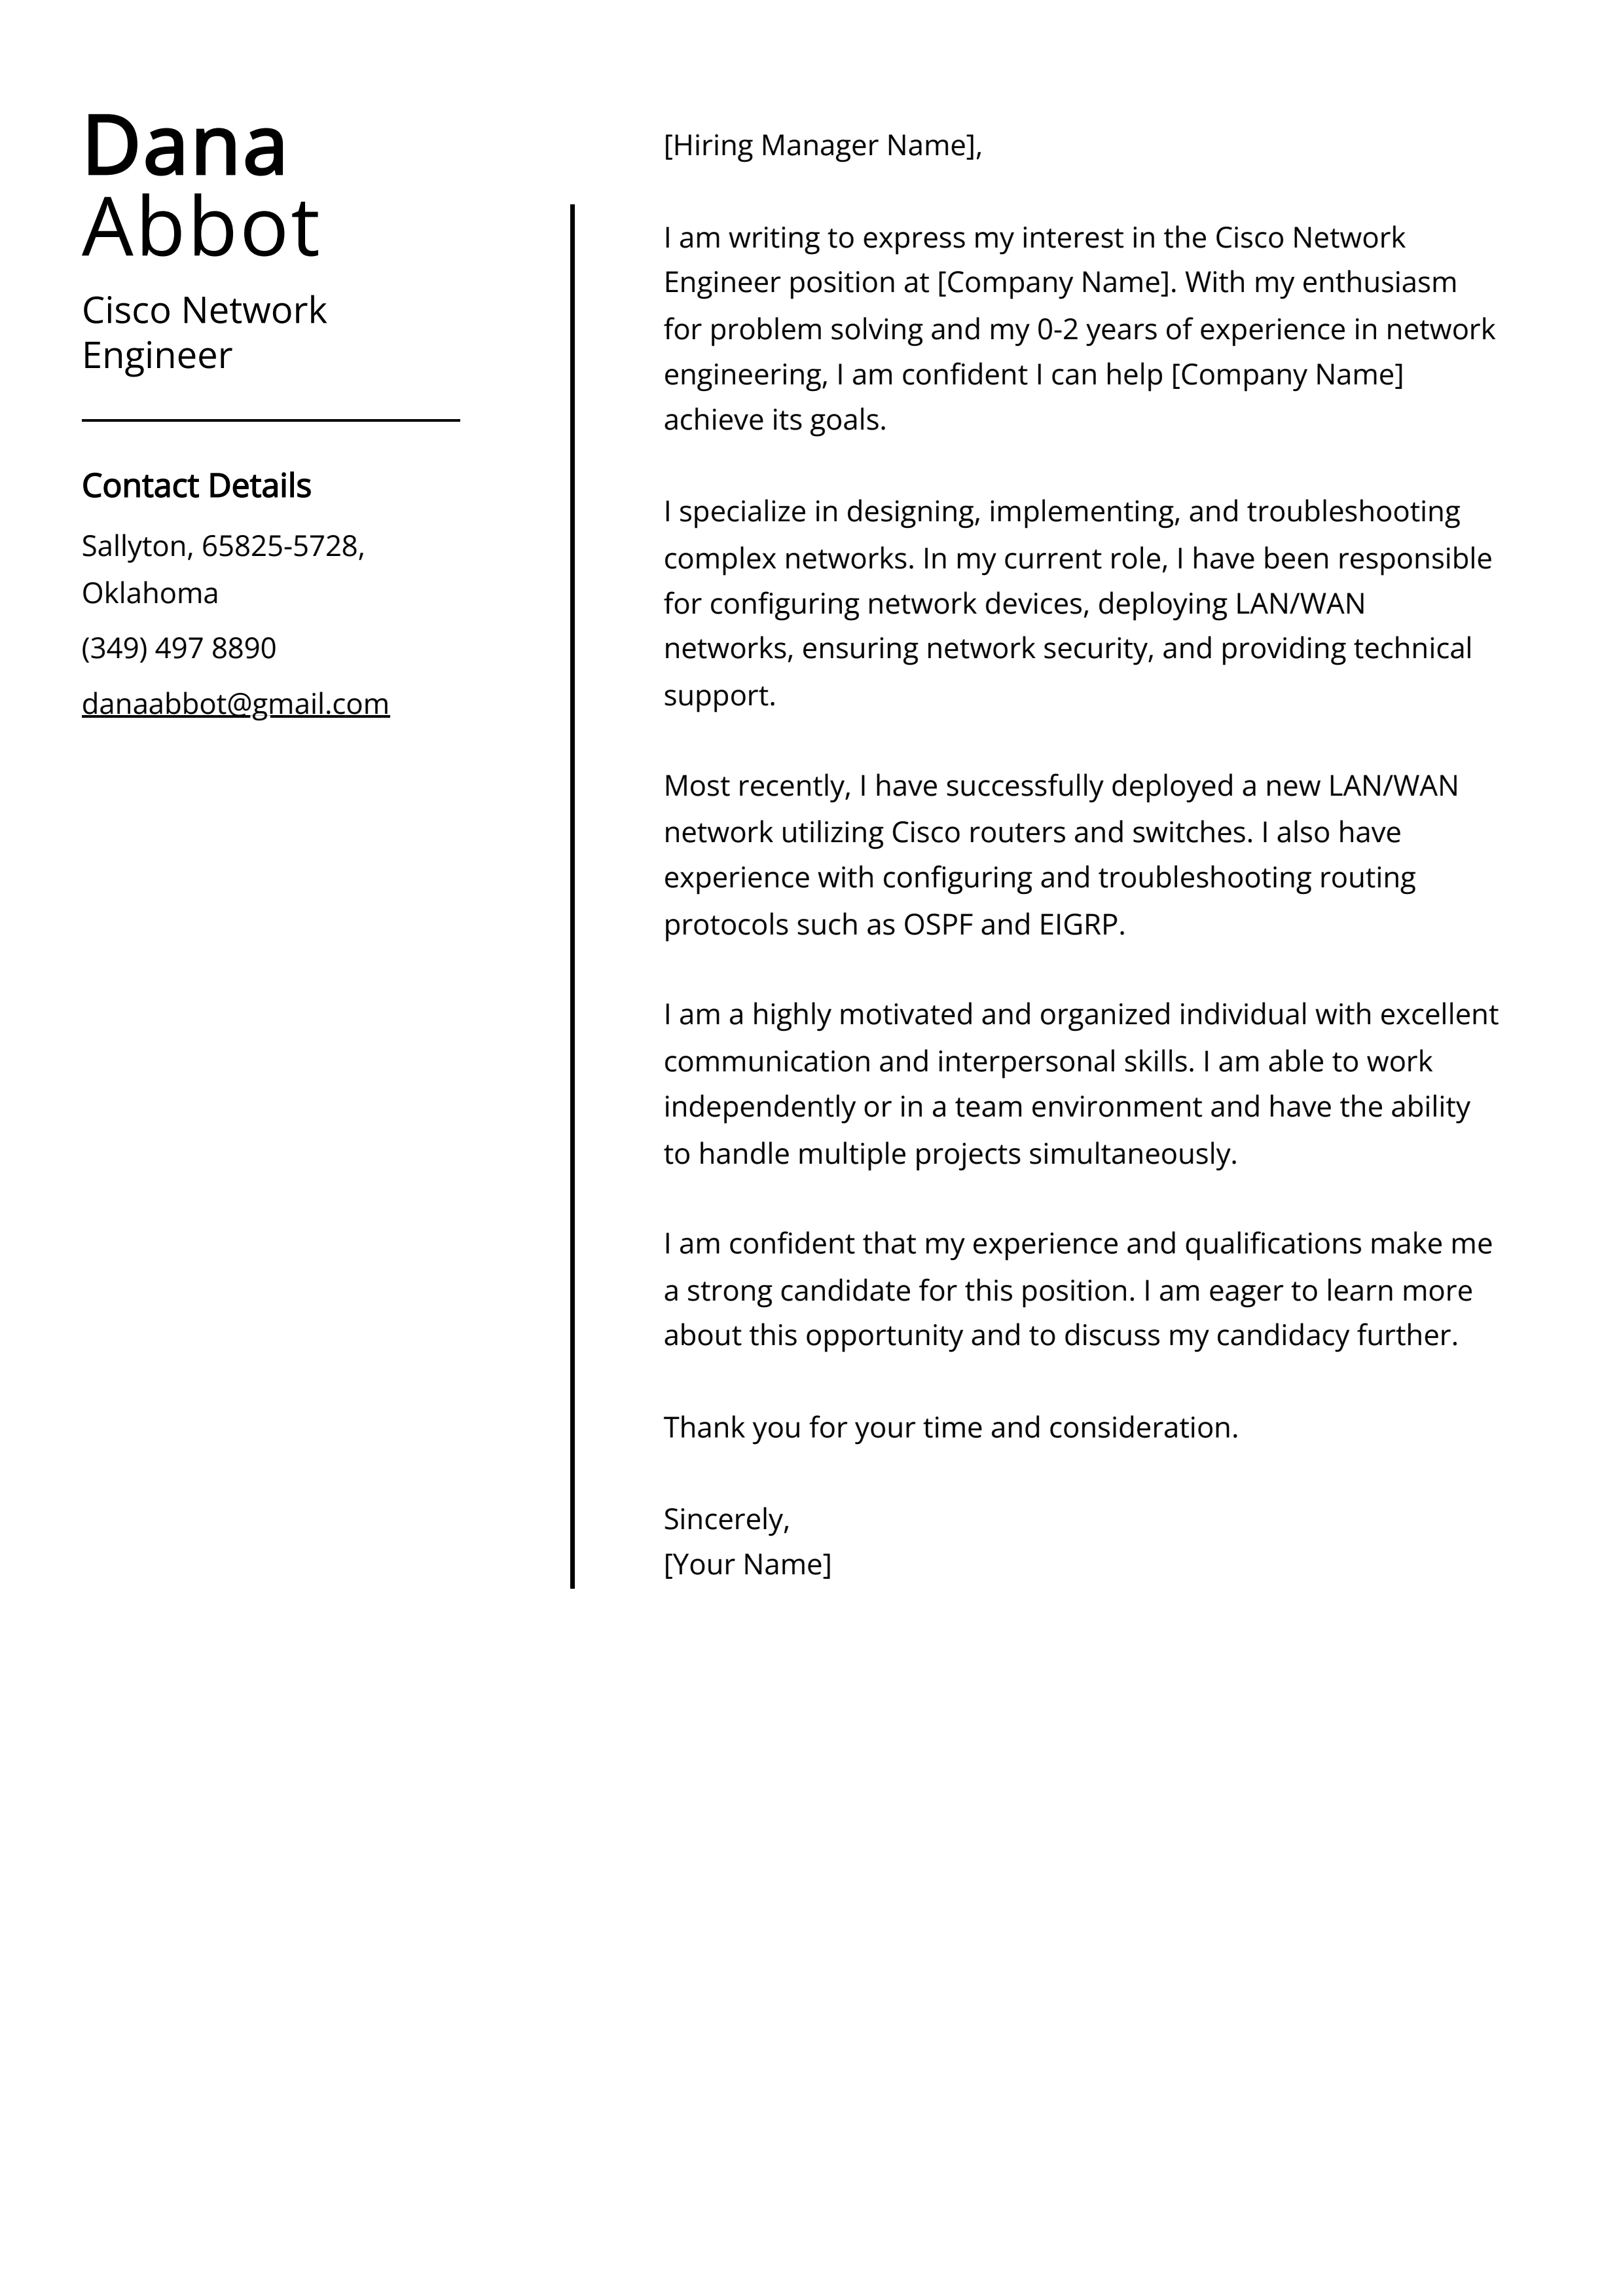 Cisco Network Engineer Cover Letter Example